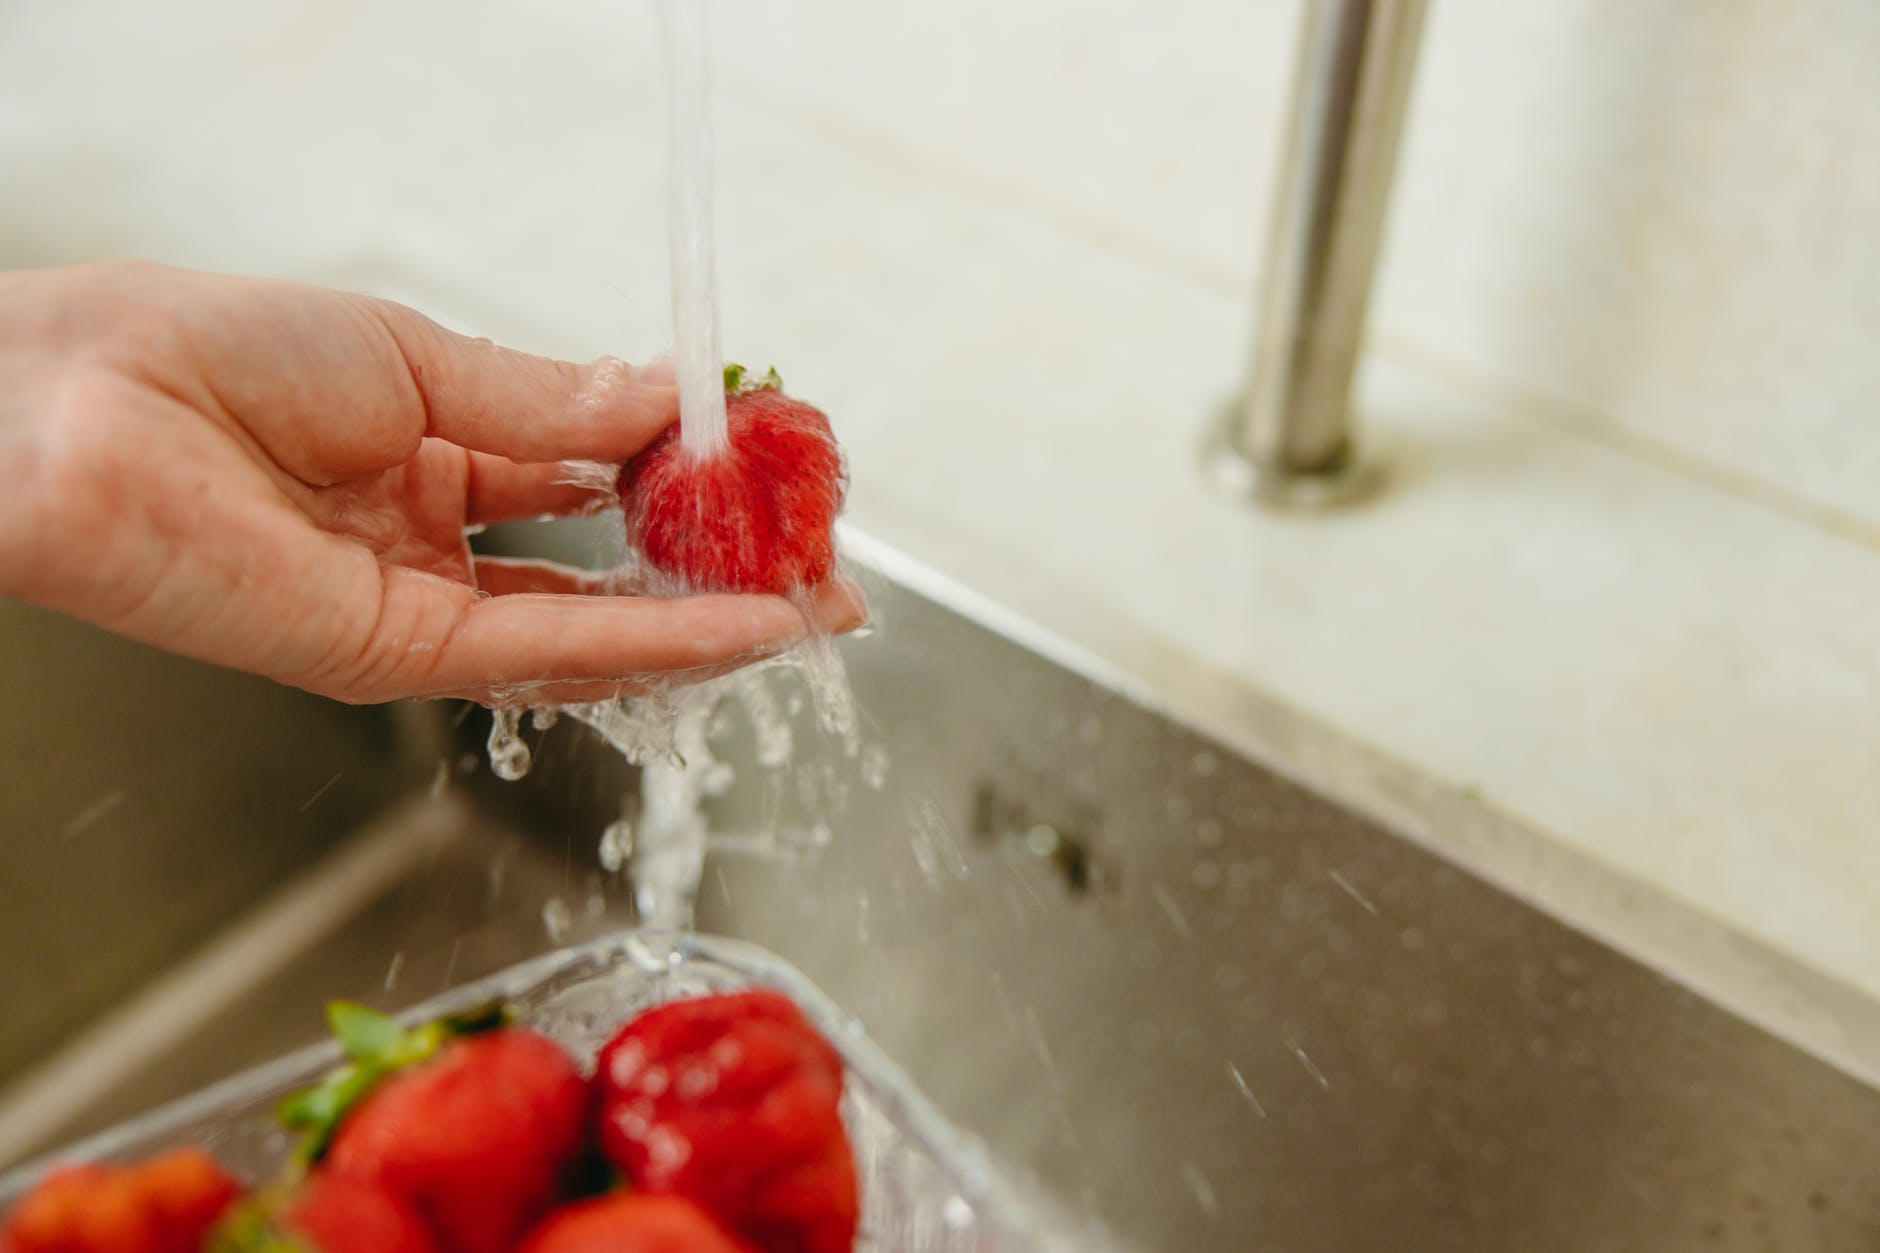 a person washing strawberries